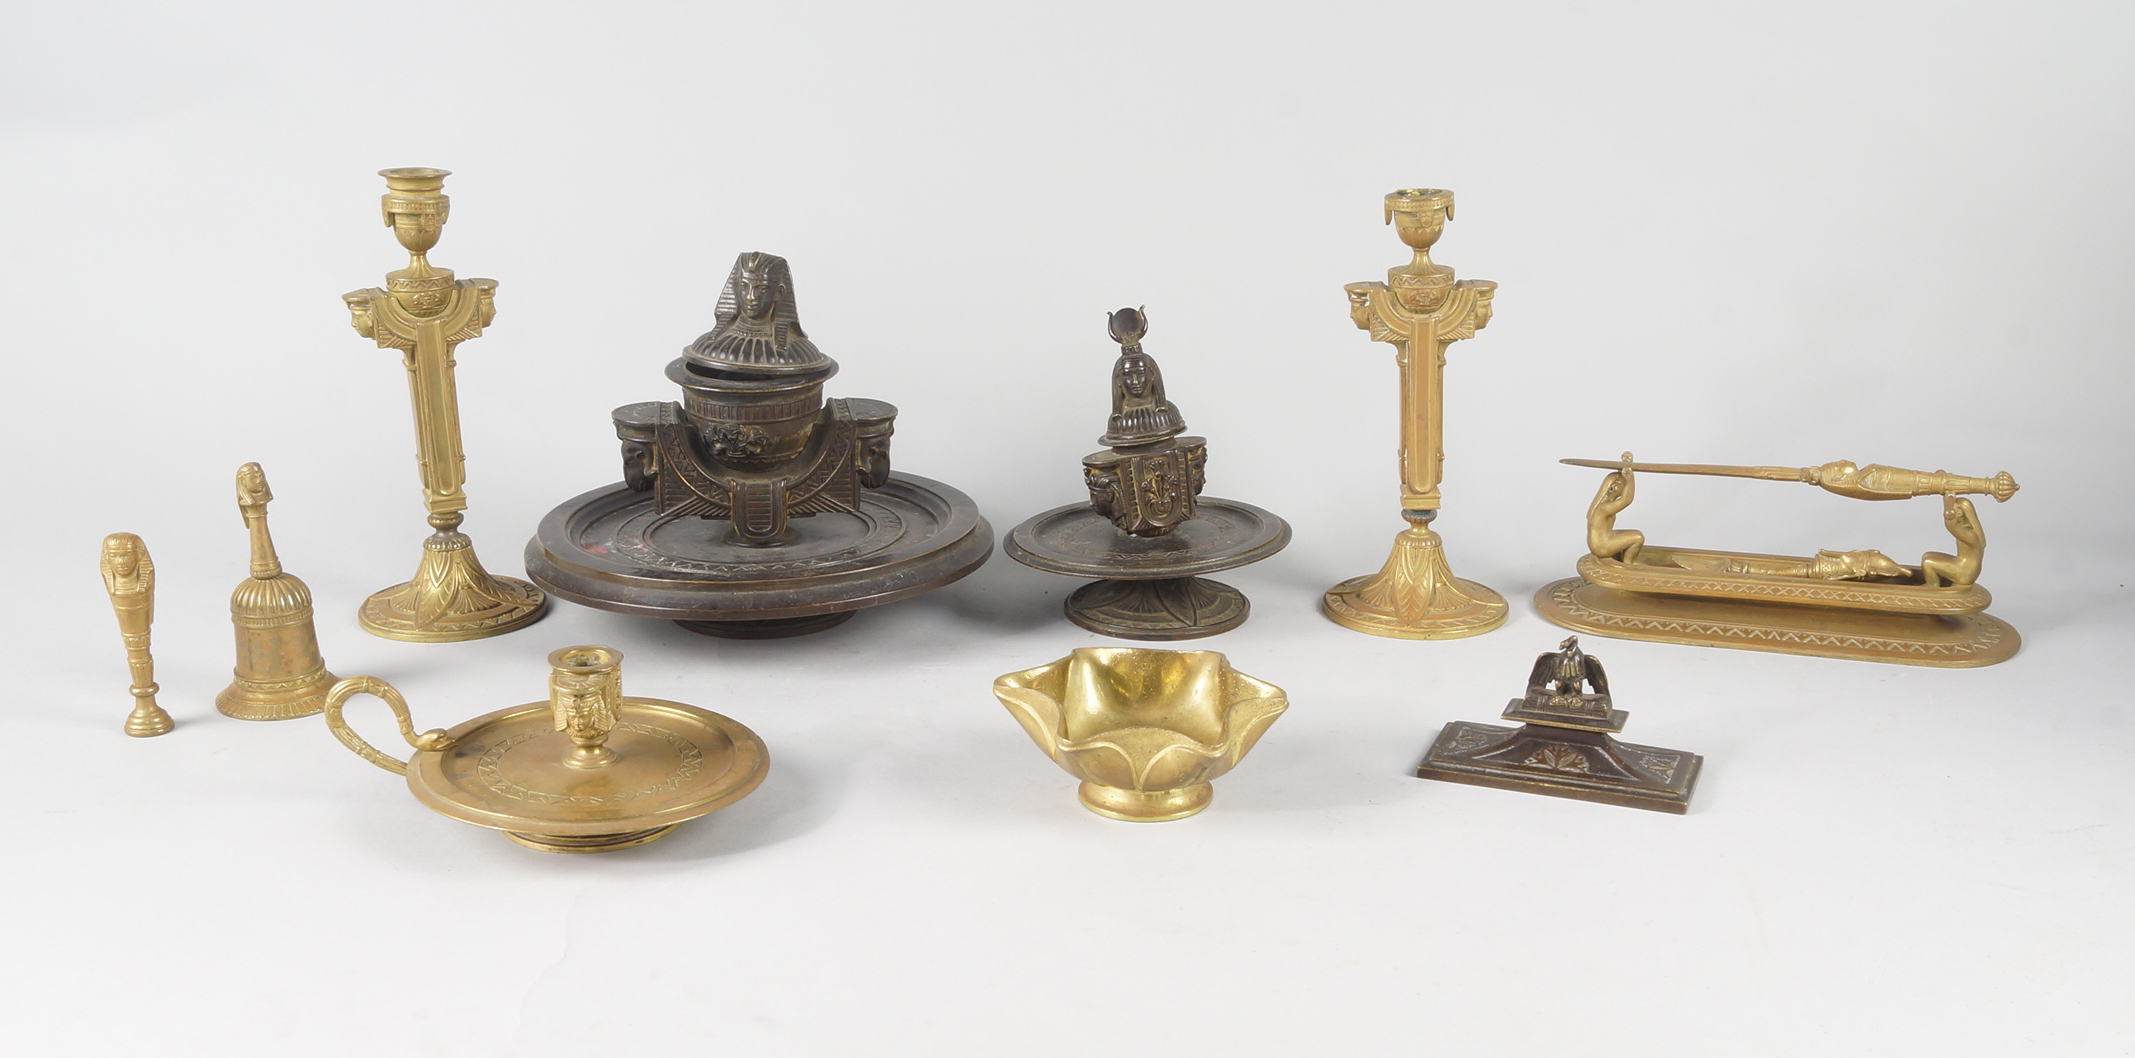 A French bronze Egyptian Revival desk set, 19th century,